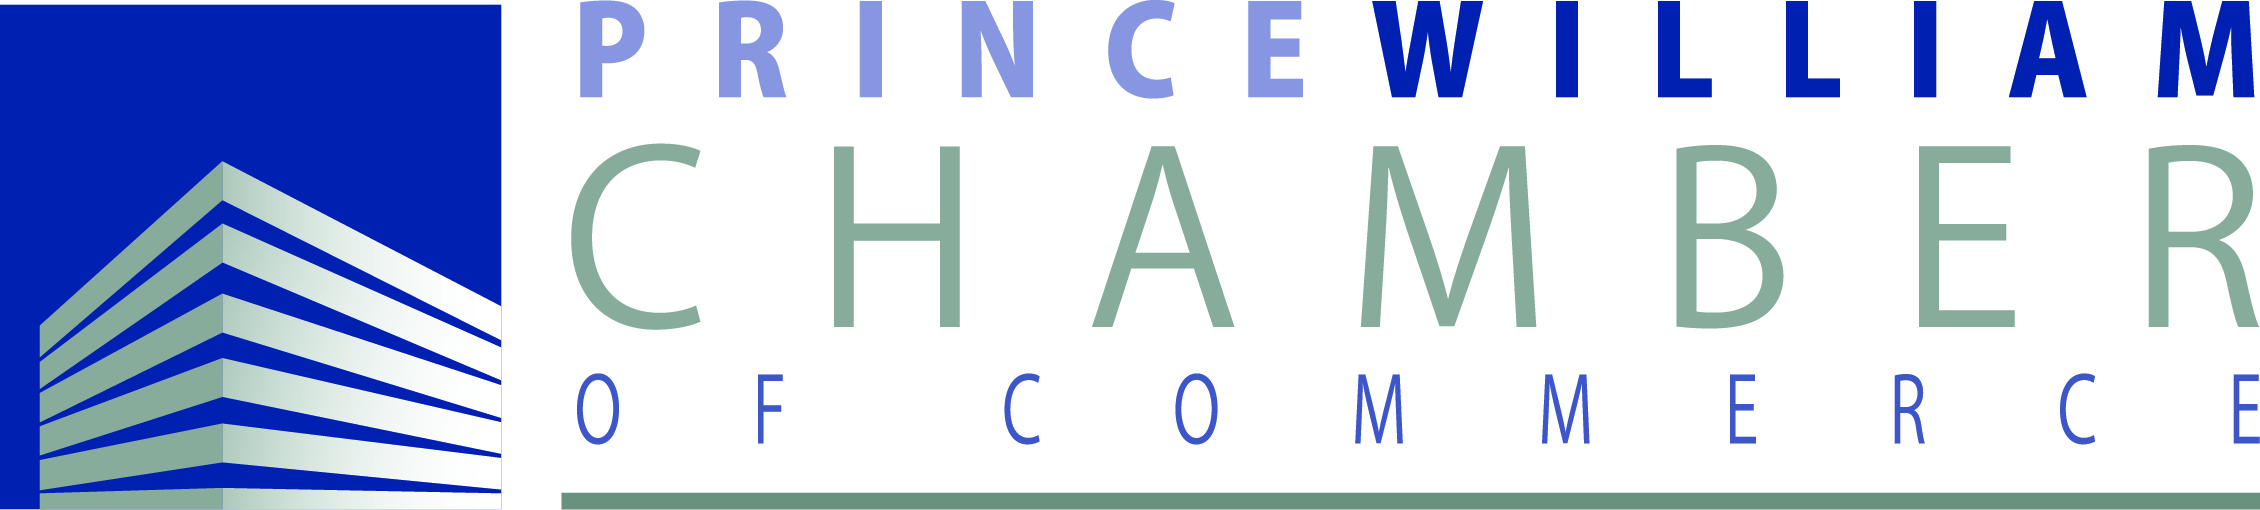 Prince William Chamber of Commerce Logo